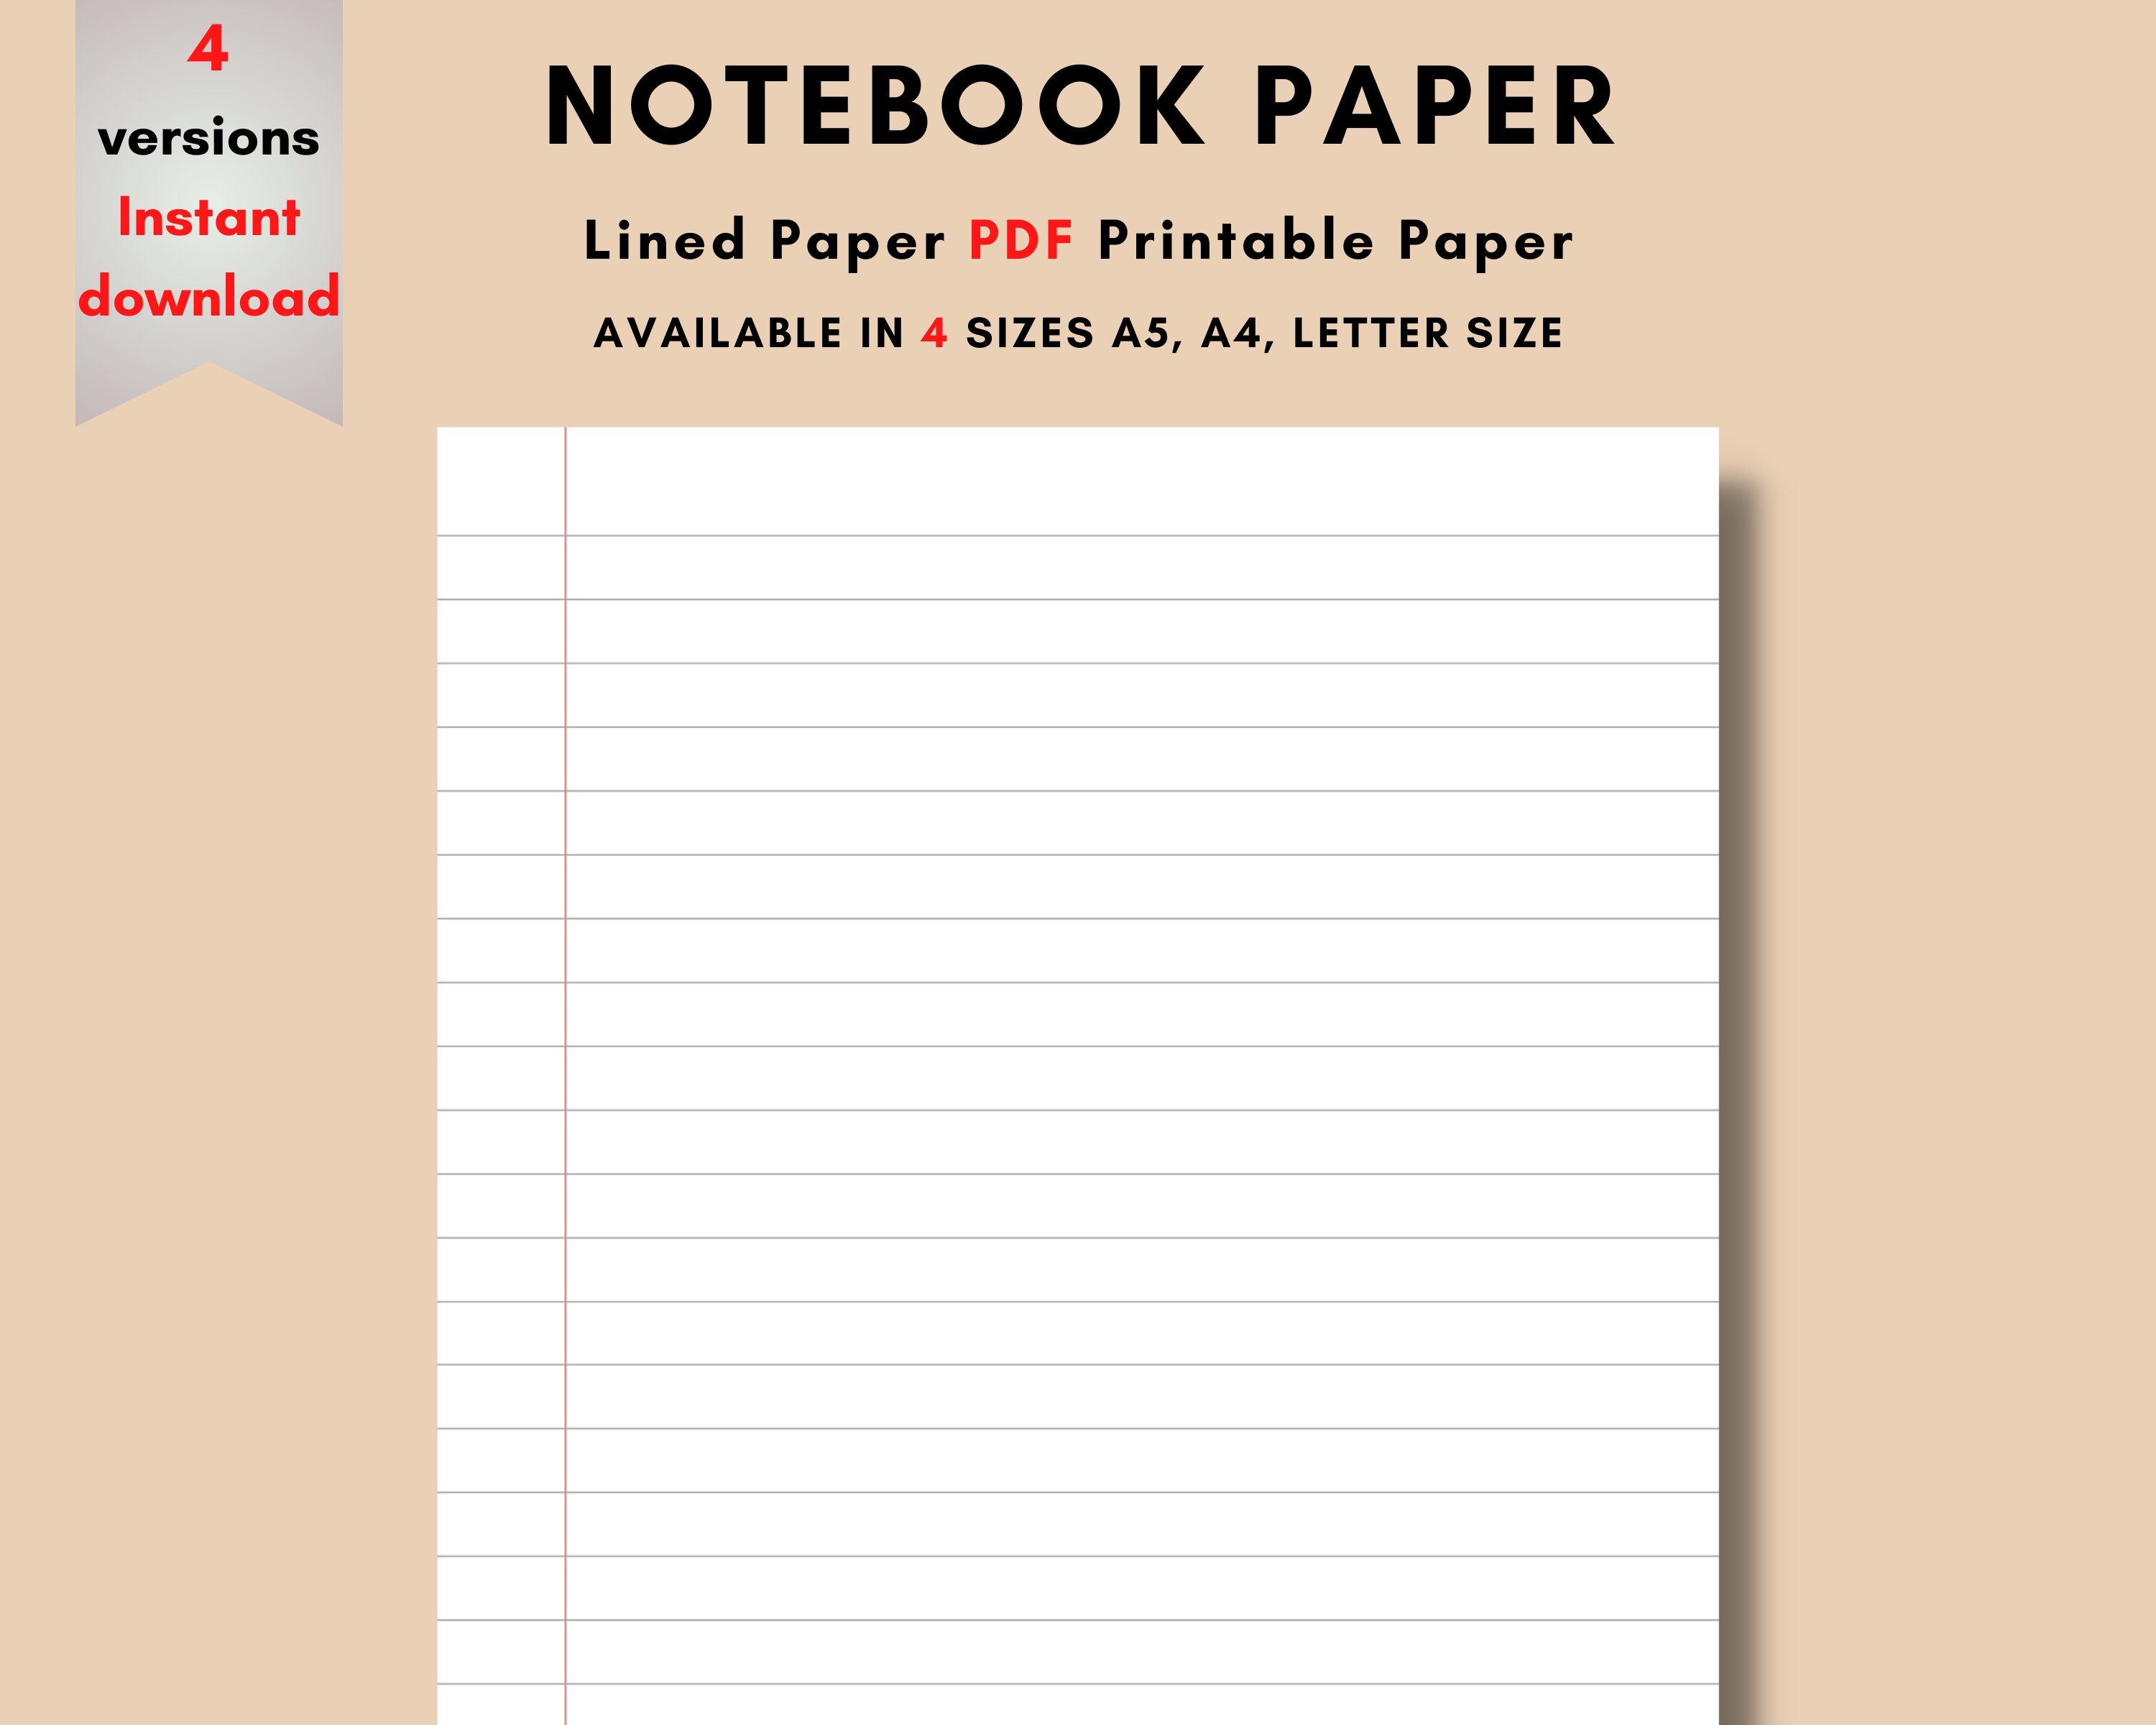 Lined Paper Different Spacing 6mm, 8mm, 10mm, 12mm, 14mm